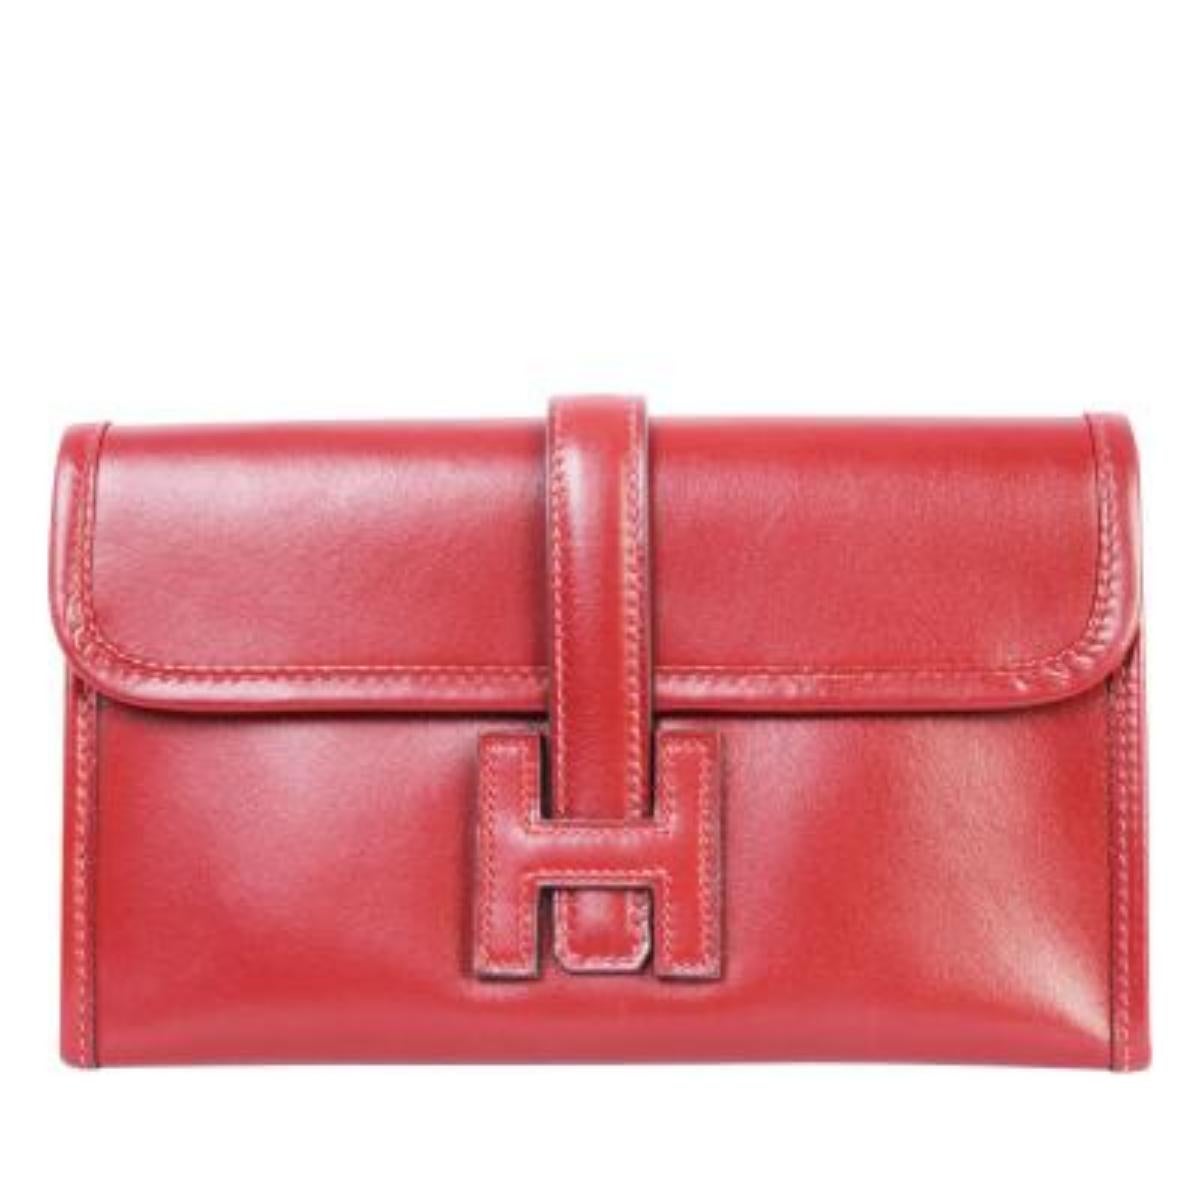 Hermes Burgundy Box Calfskin Jige Clutch

The infamous Hermes Jige clutch had been a staple for years. This sleek yet spacious clutch comes in red shiny box leather, featuring the brand's iconic logo at the front that acts as pull tab closure. A